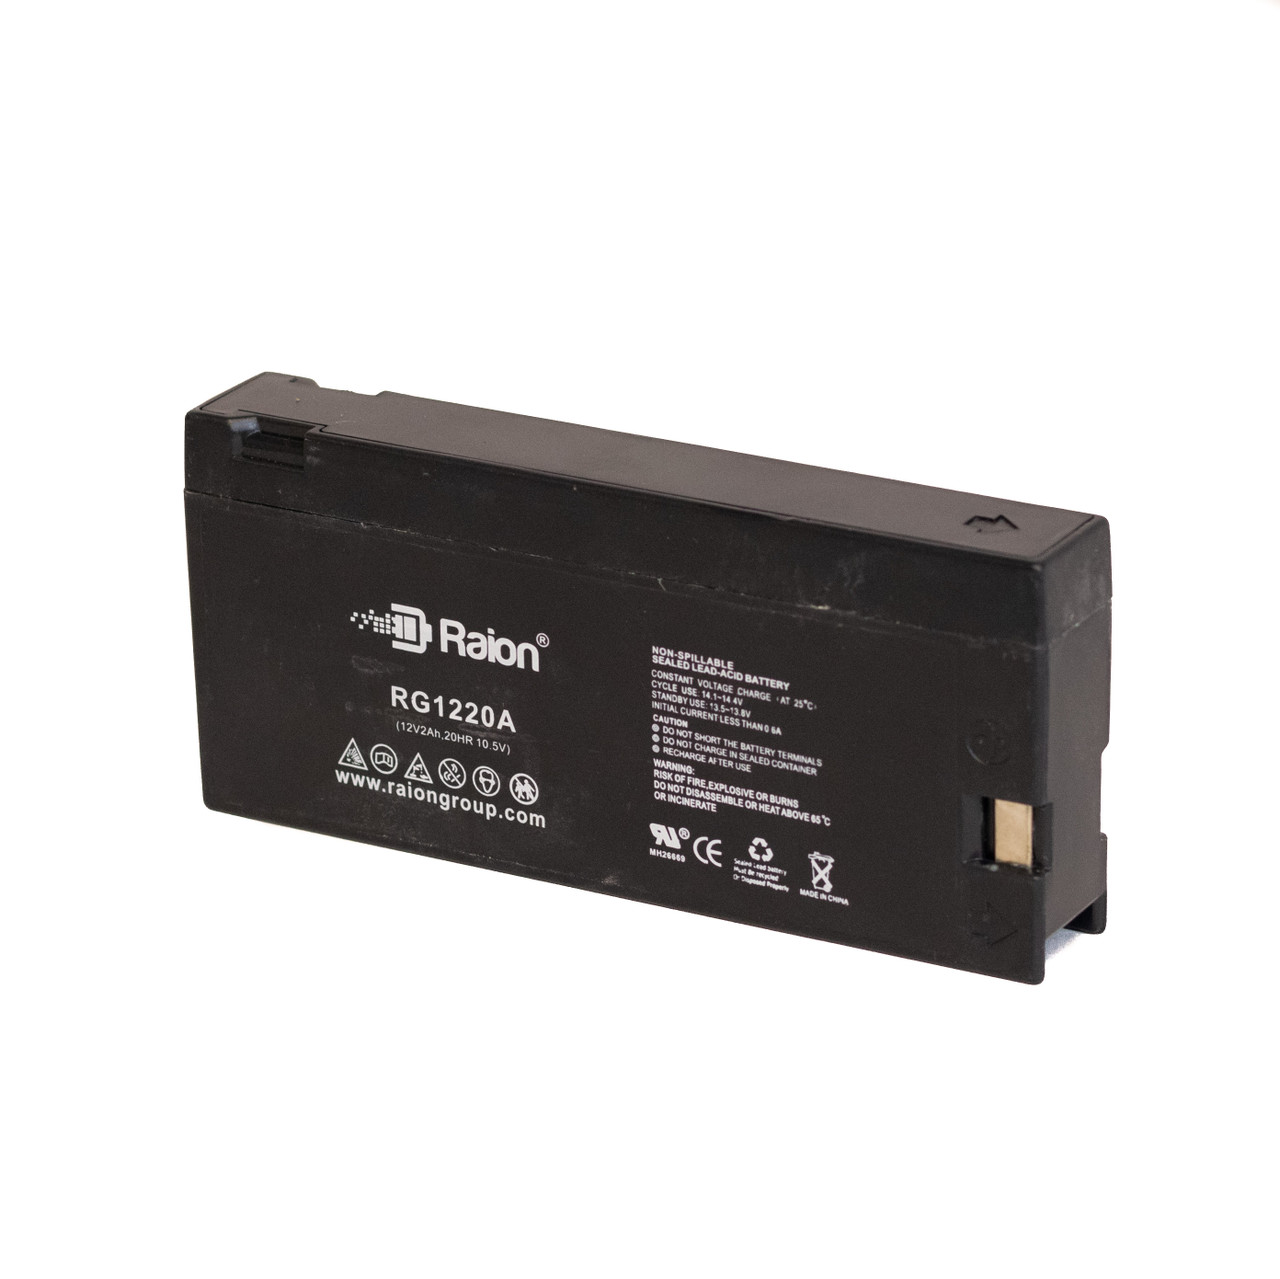 Raion Power RG1220A Replacement Battery for Magnavox CVL-325